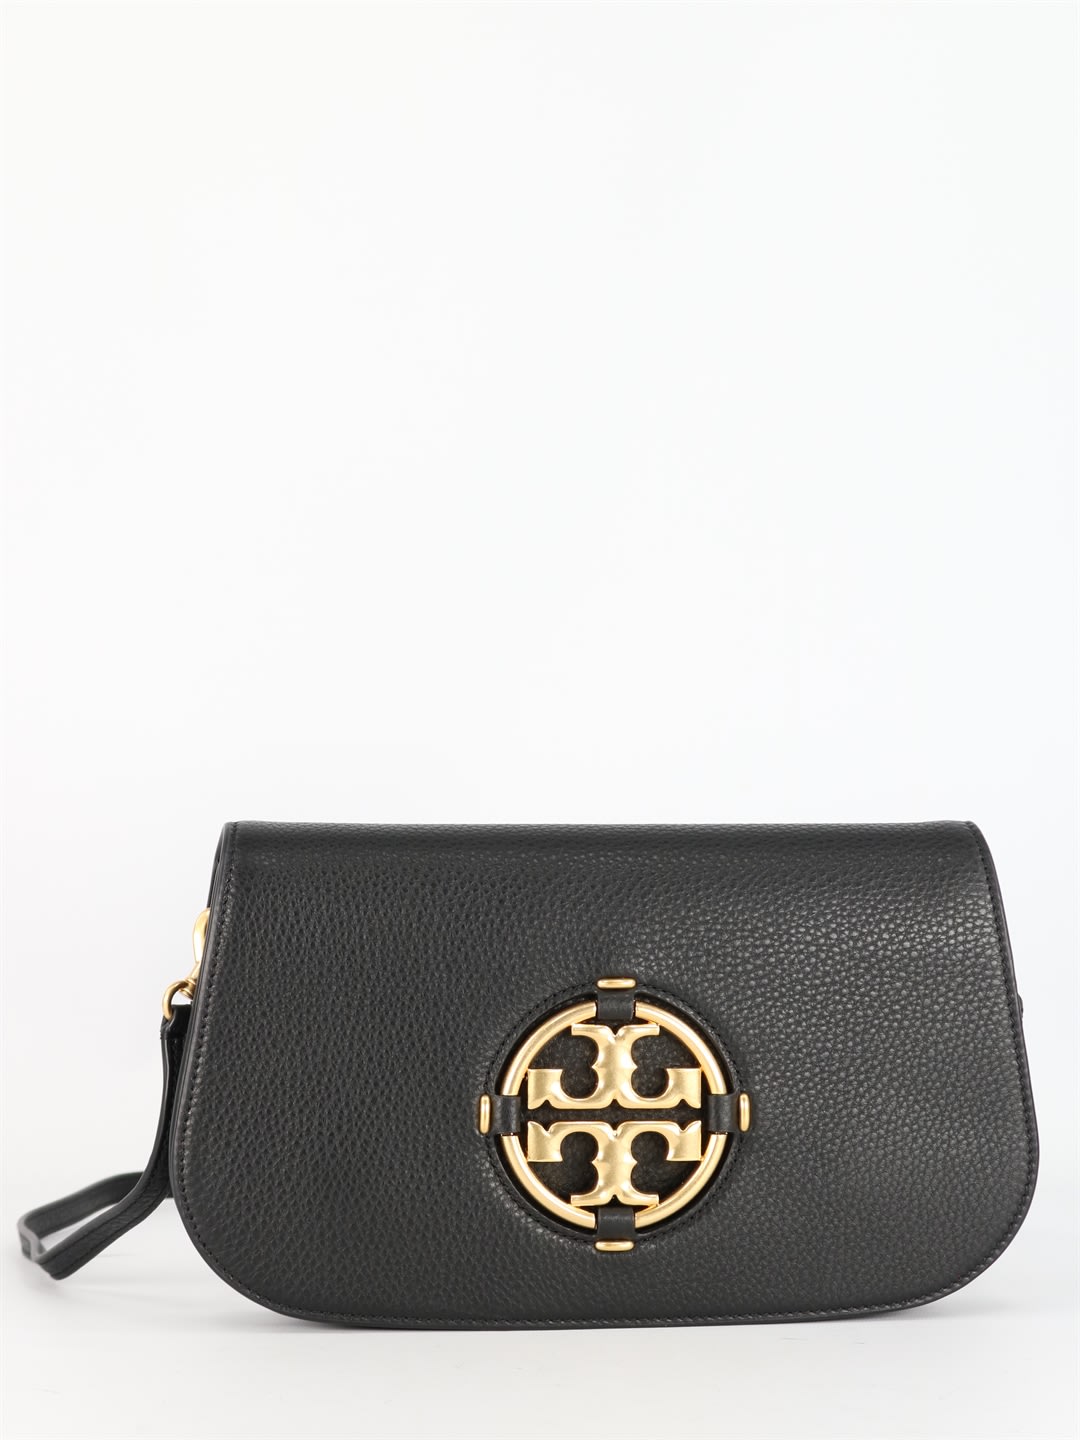 Tory Burch Small Miller Bag In Black Leather